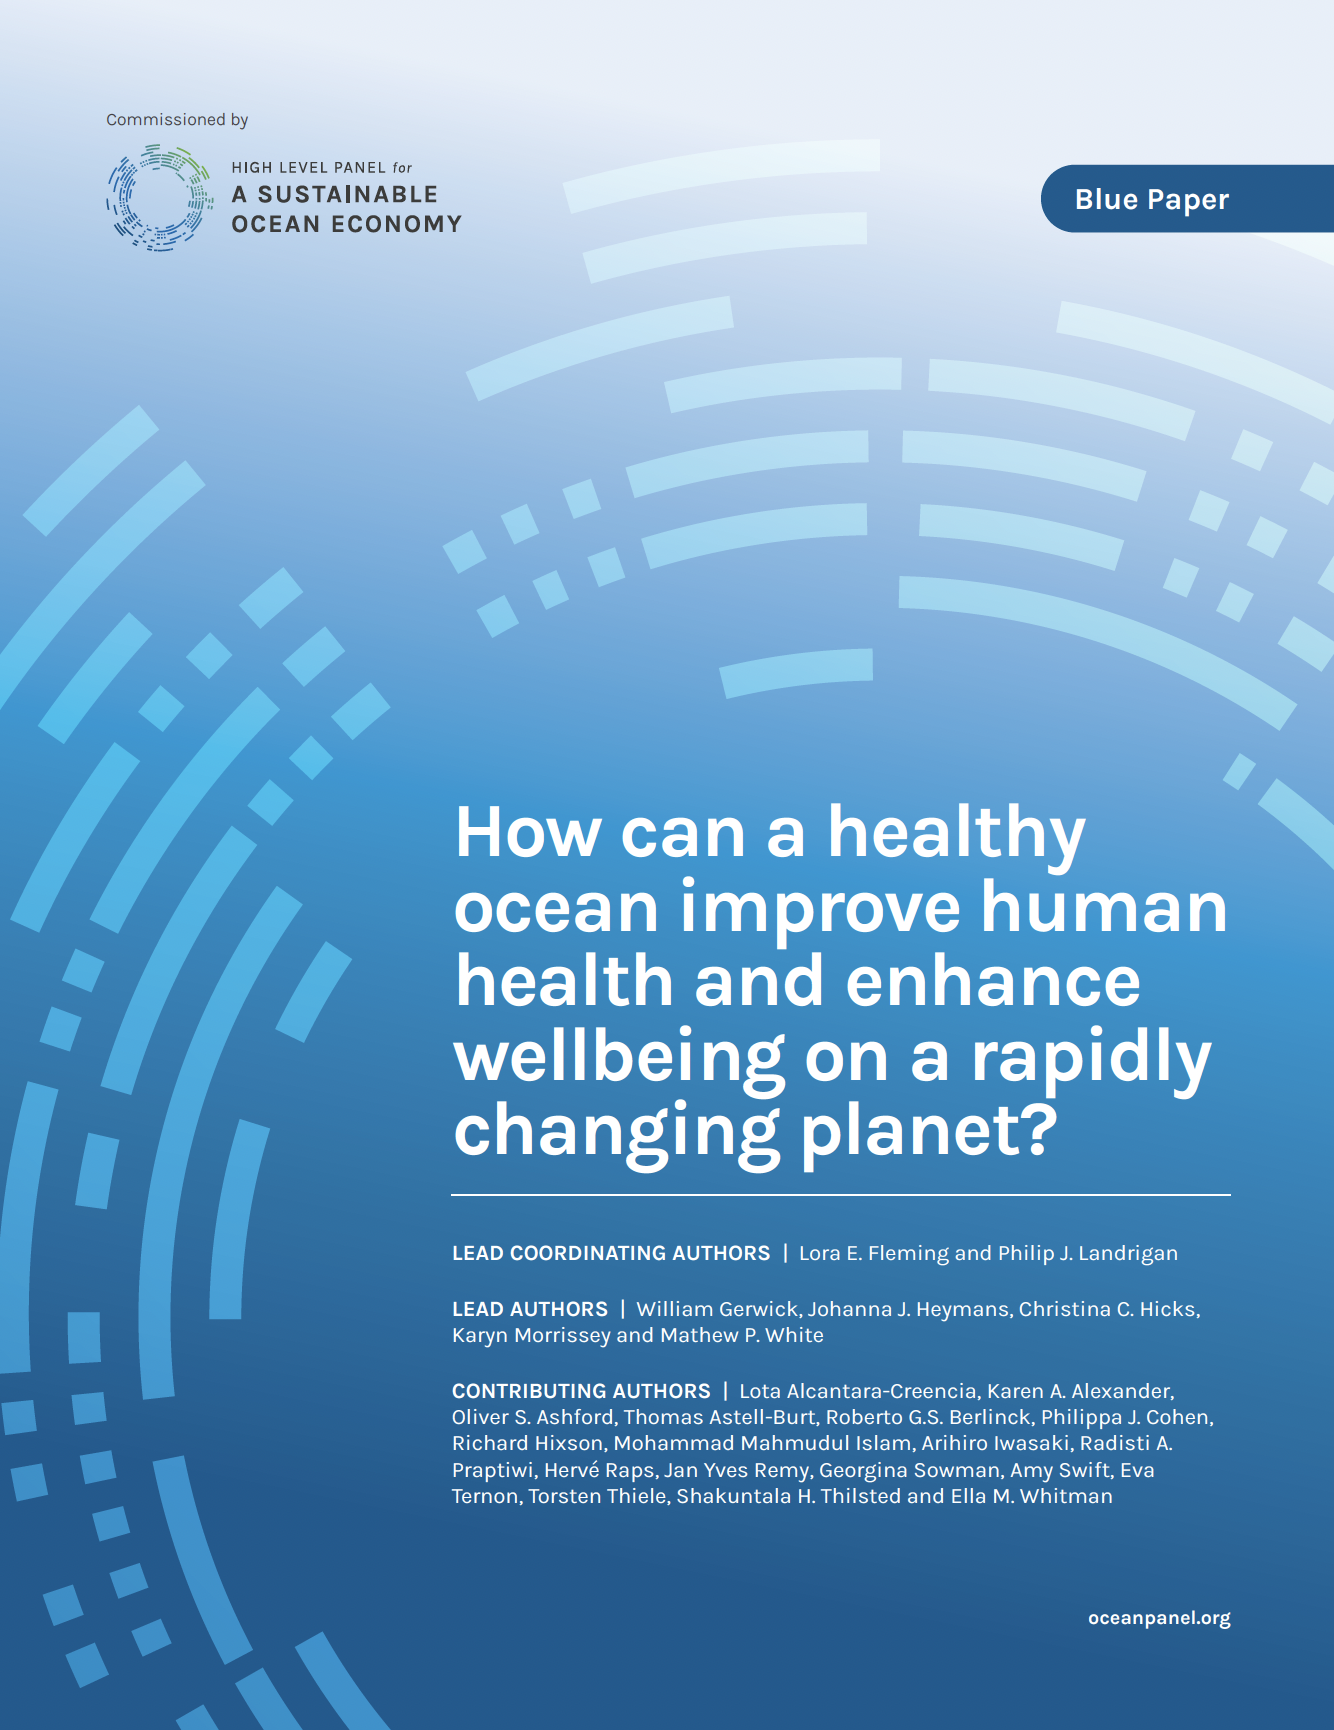 How can a healthy ocean improve human health and enhance wellbeing on a rapidly changing planet?